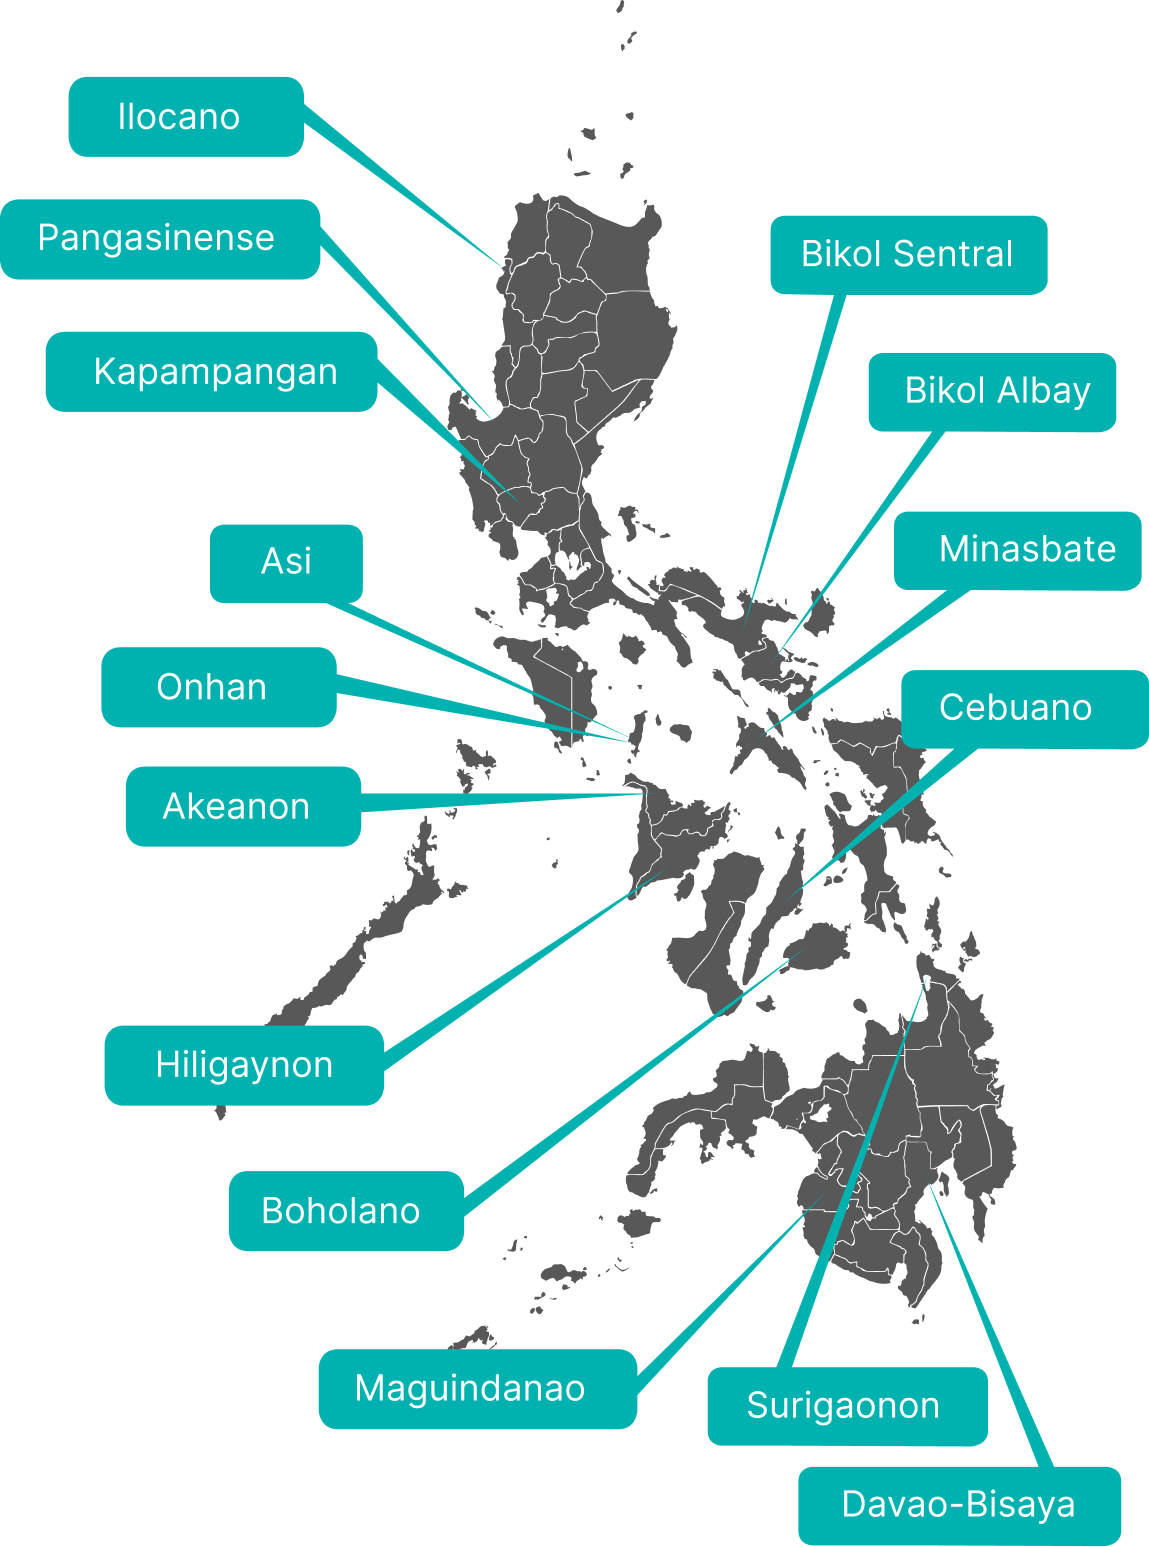 A map of the Philippines with a list of ethnicities pointed to the location they can be found in.